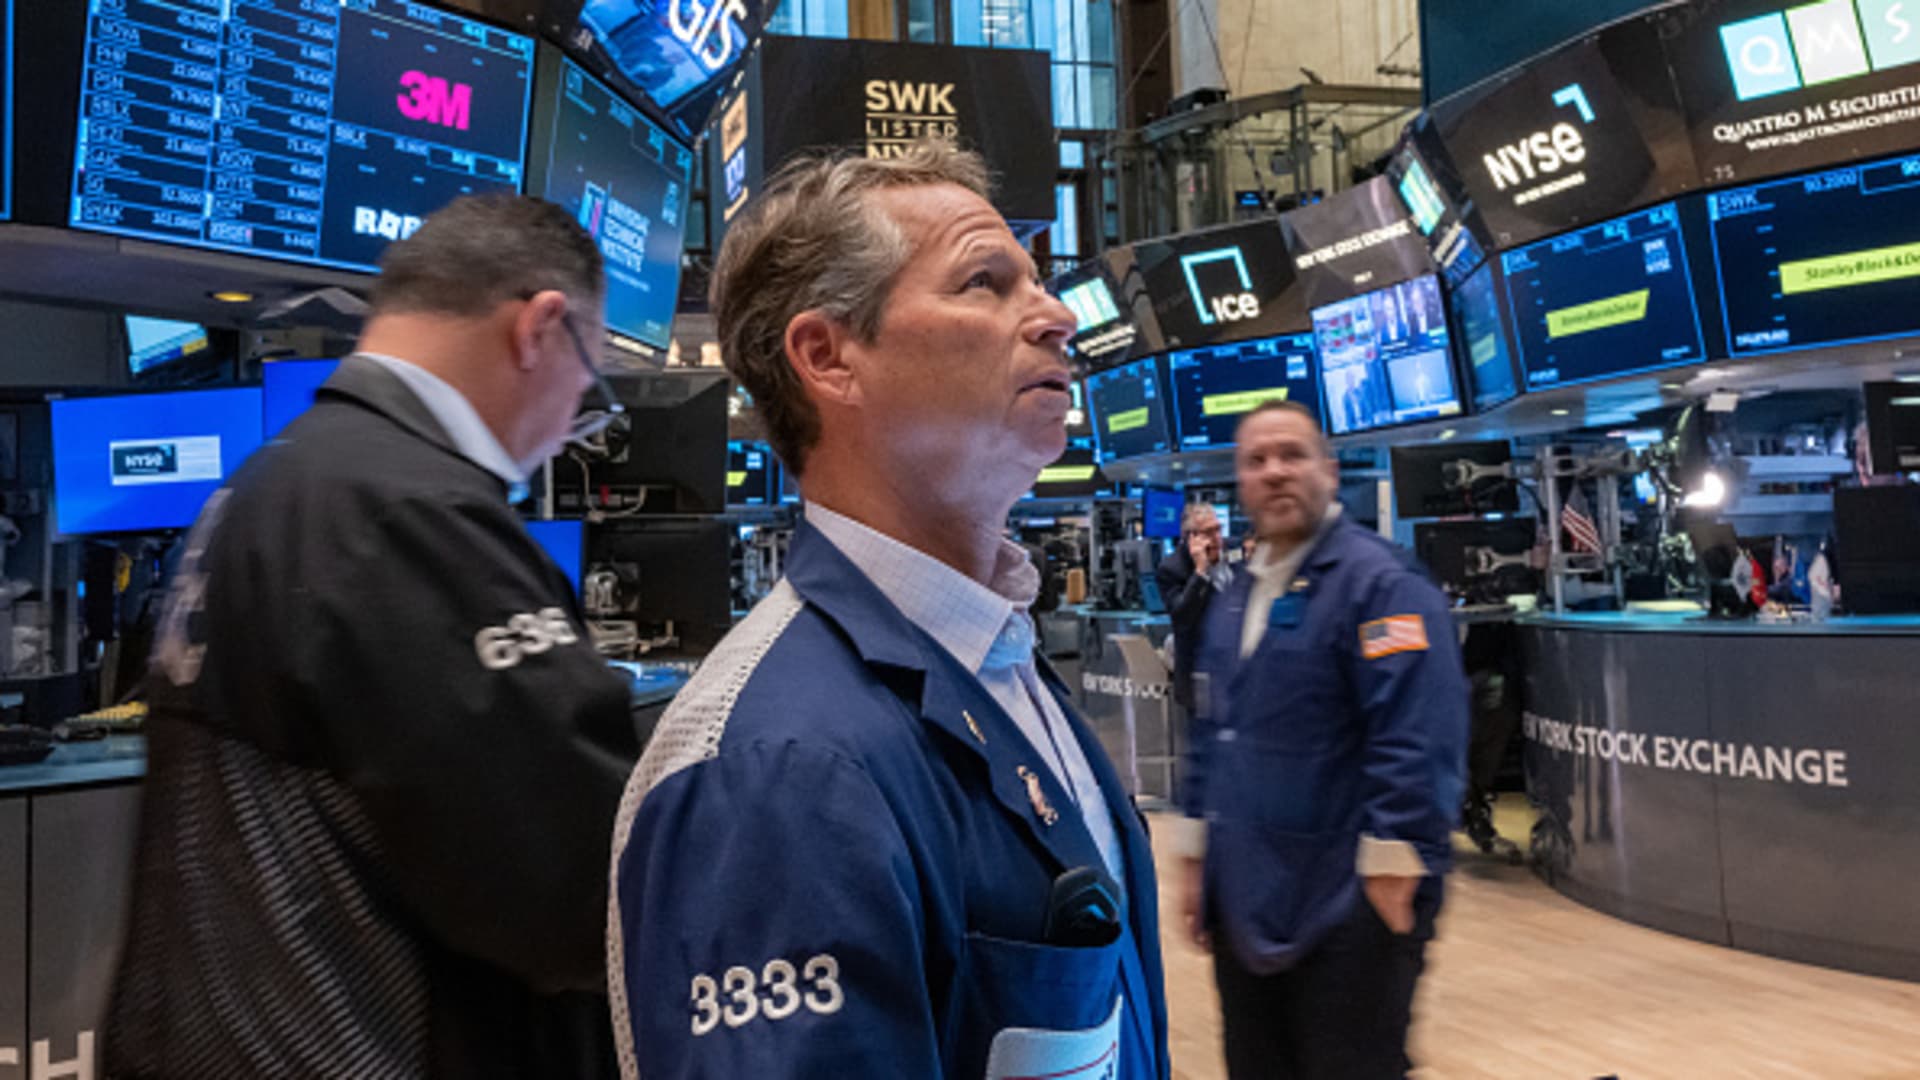 Investors look to data, Fed comments in week ahead [Video]